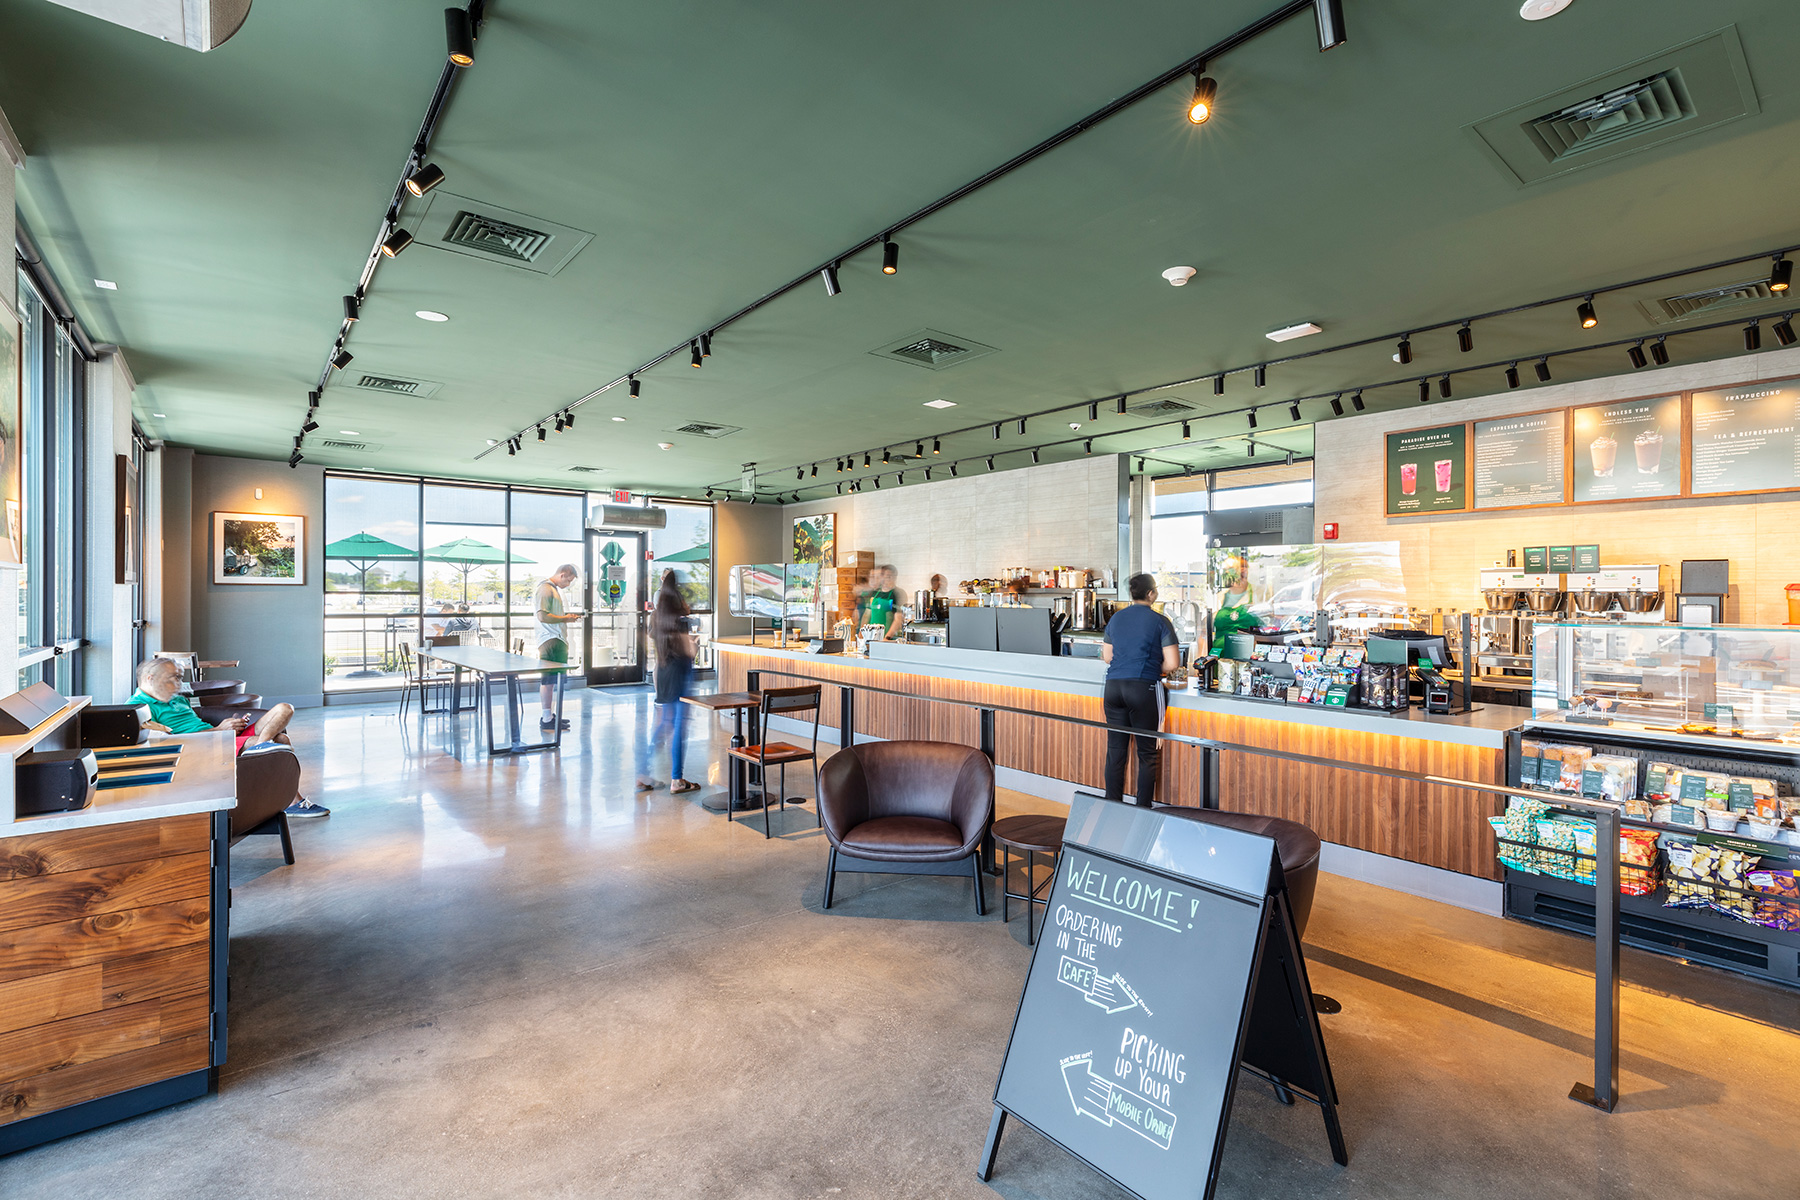 Inside of Starbucks with counter